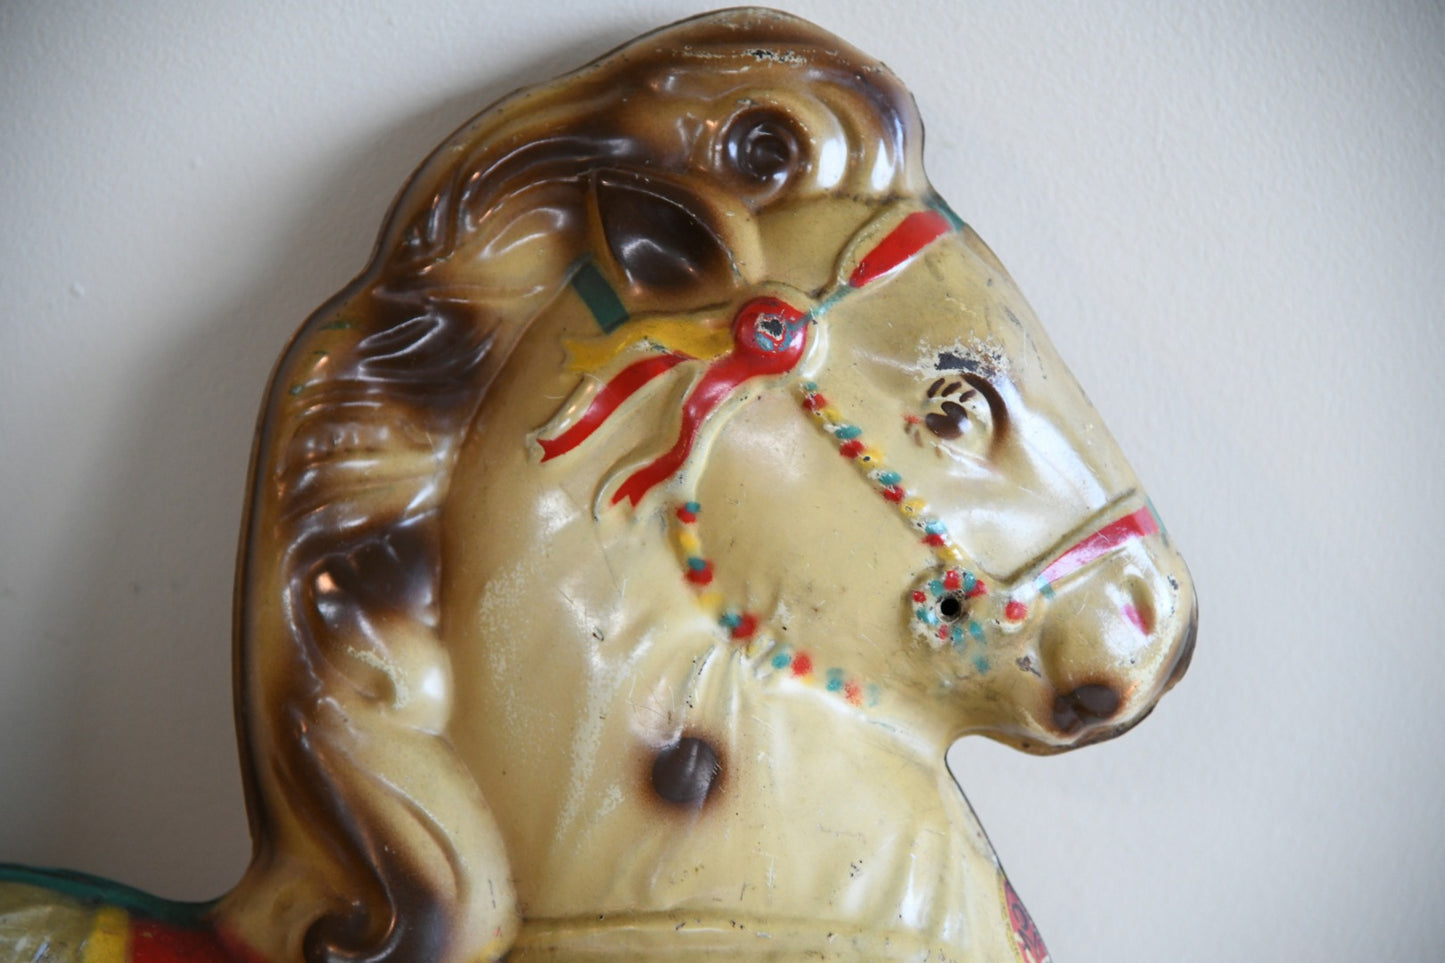 Vintage Mobo Childs Toy Metal Horse